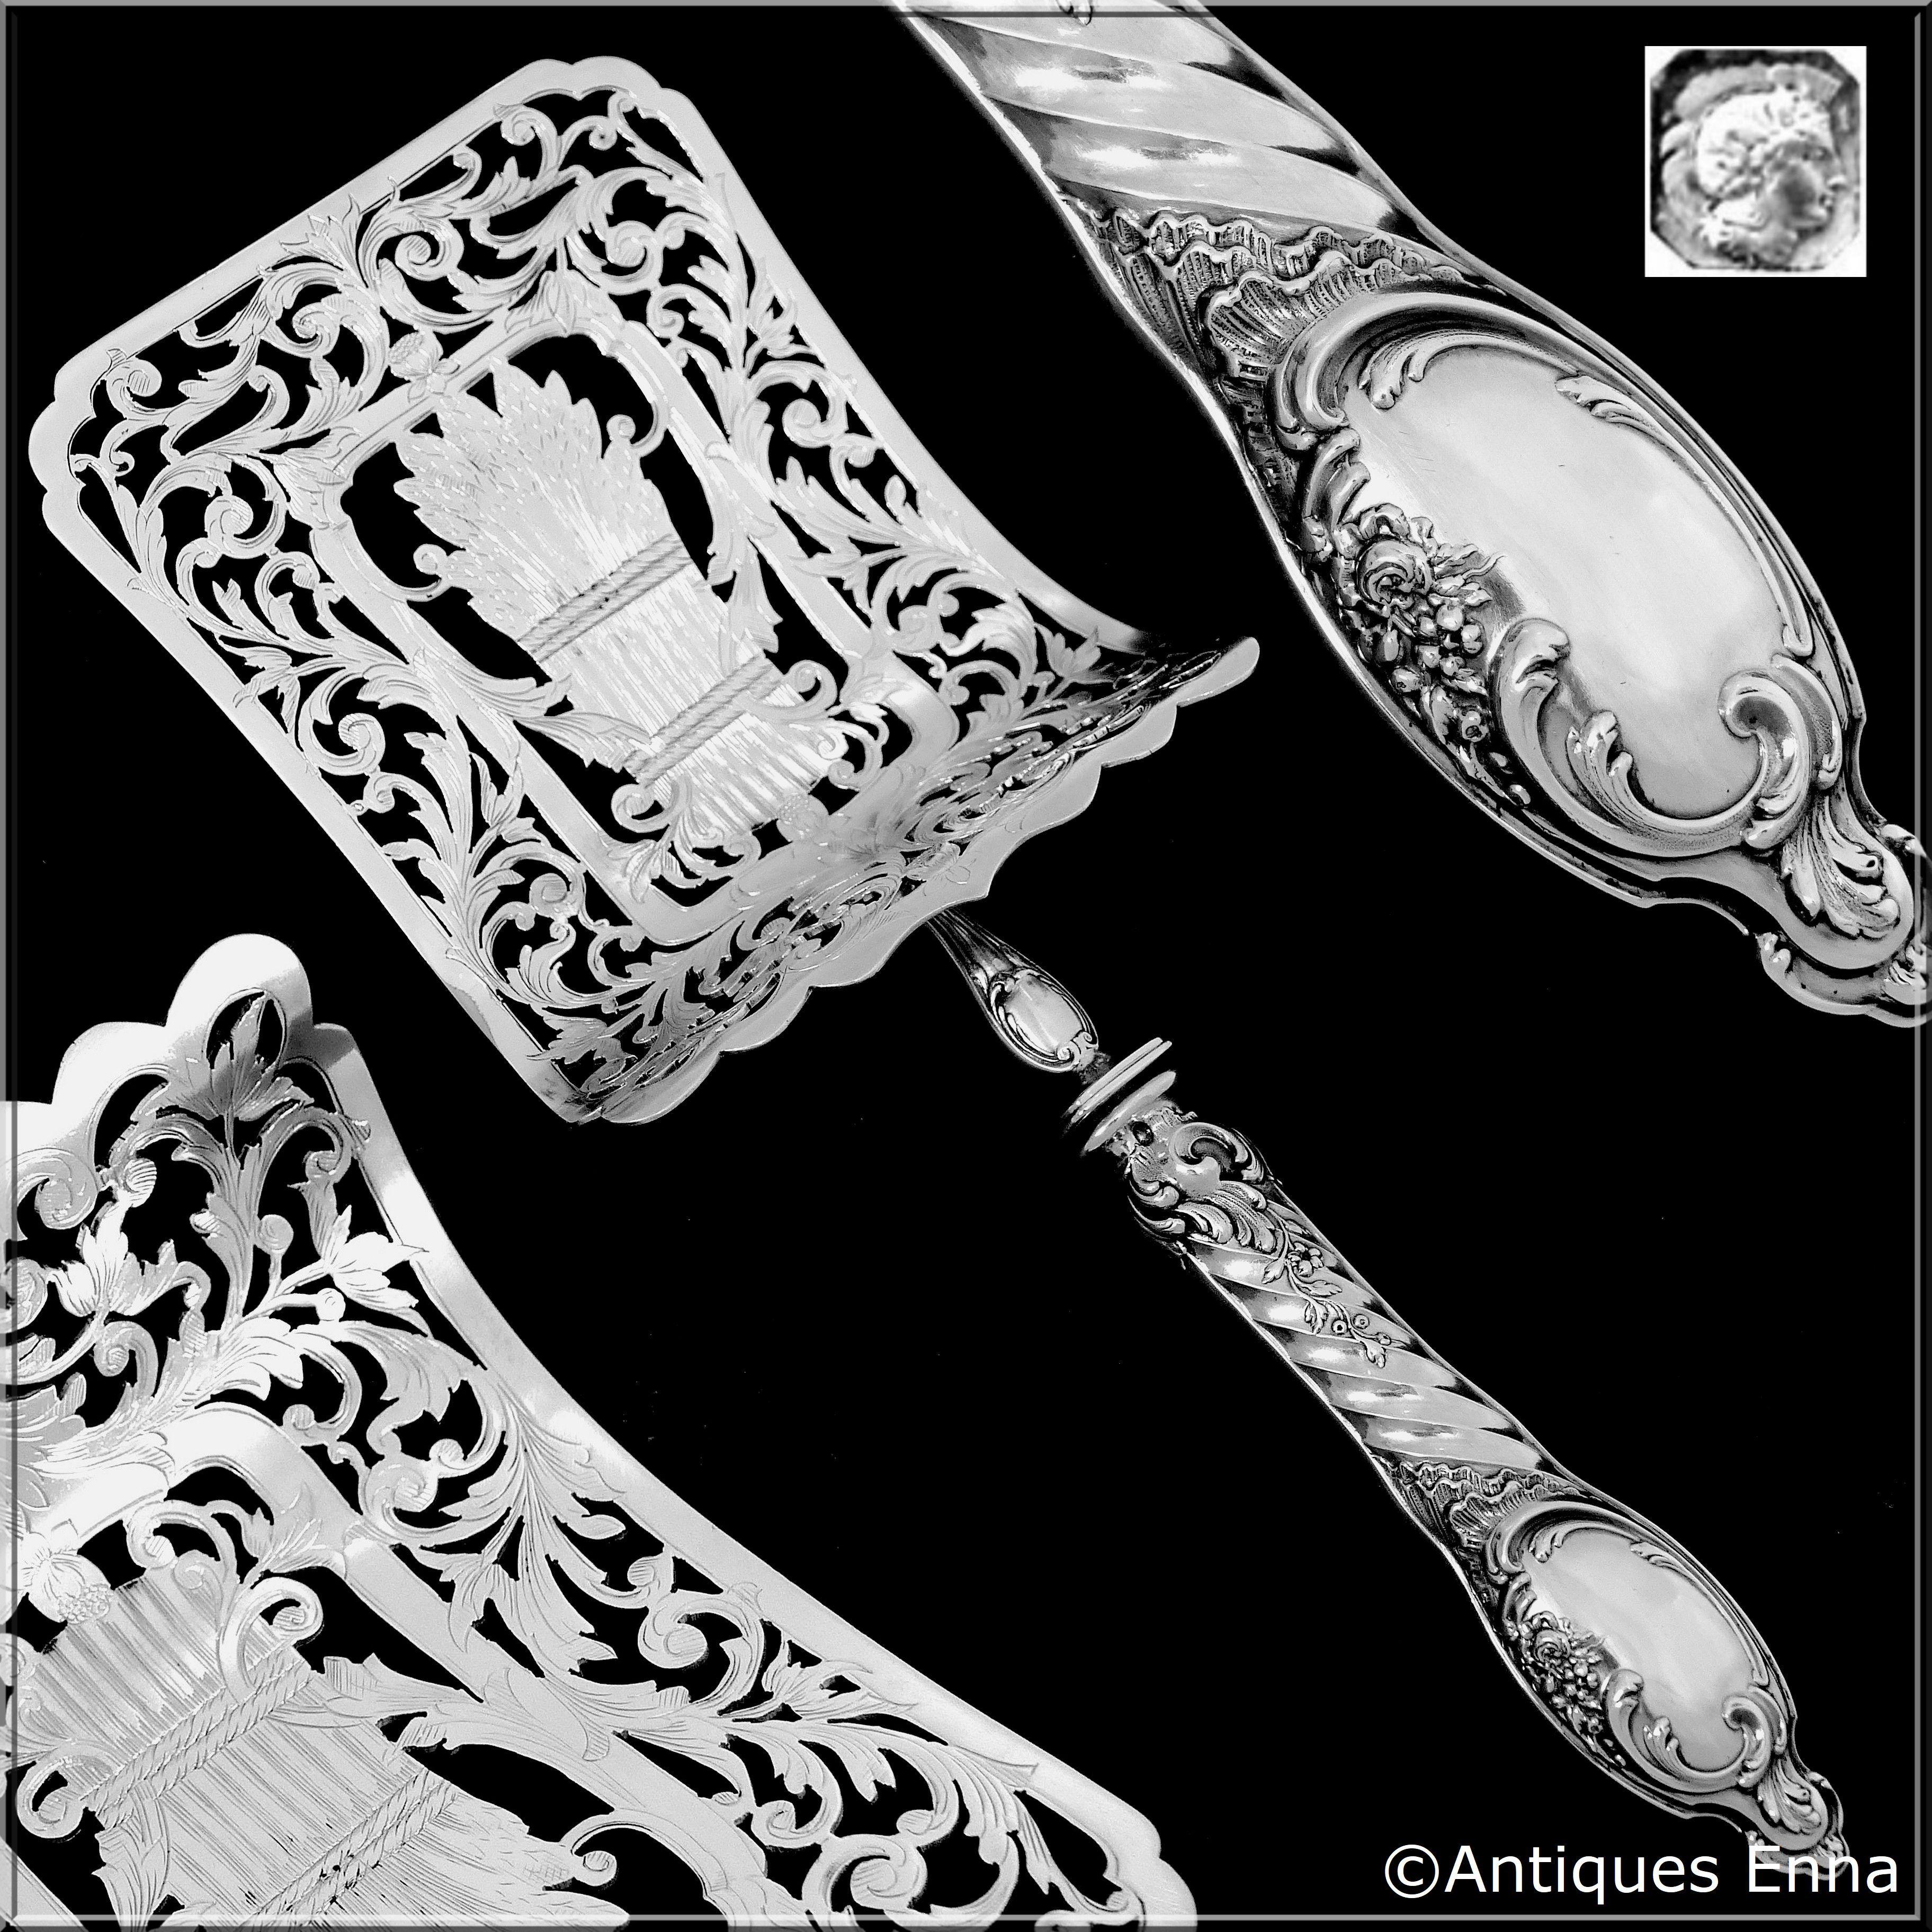 Exceptional asparagus, pastry or toast server in sterling silver. The sophistication of this design and the quality of workmanship is typical of that of the Maison Puiforcat. The curved blade has pierced and engraved with a sophisticated foliage and